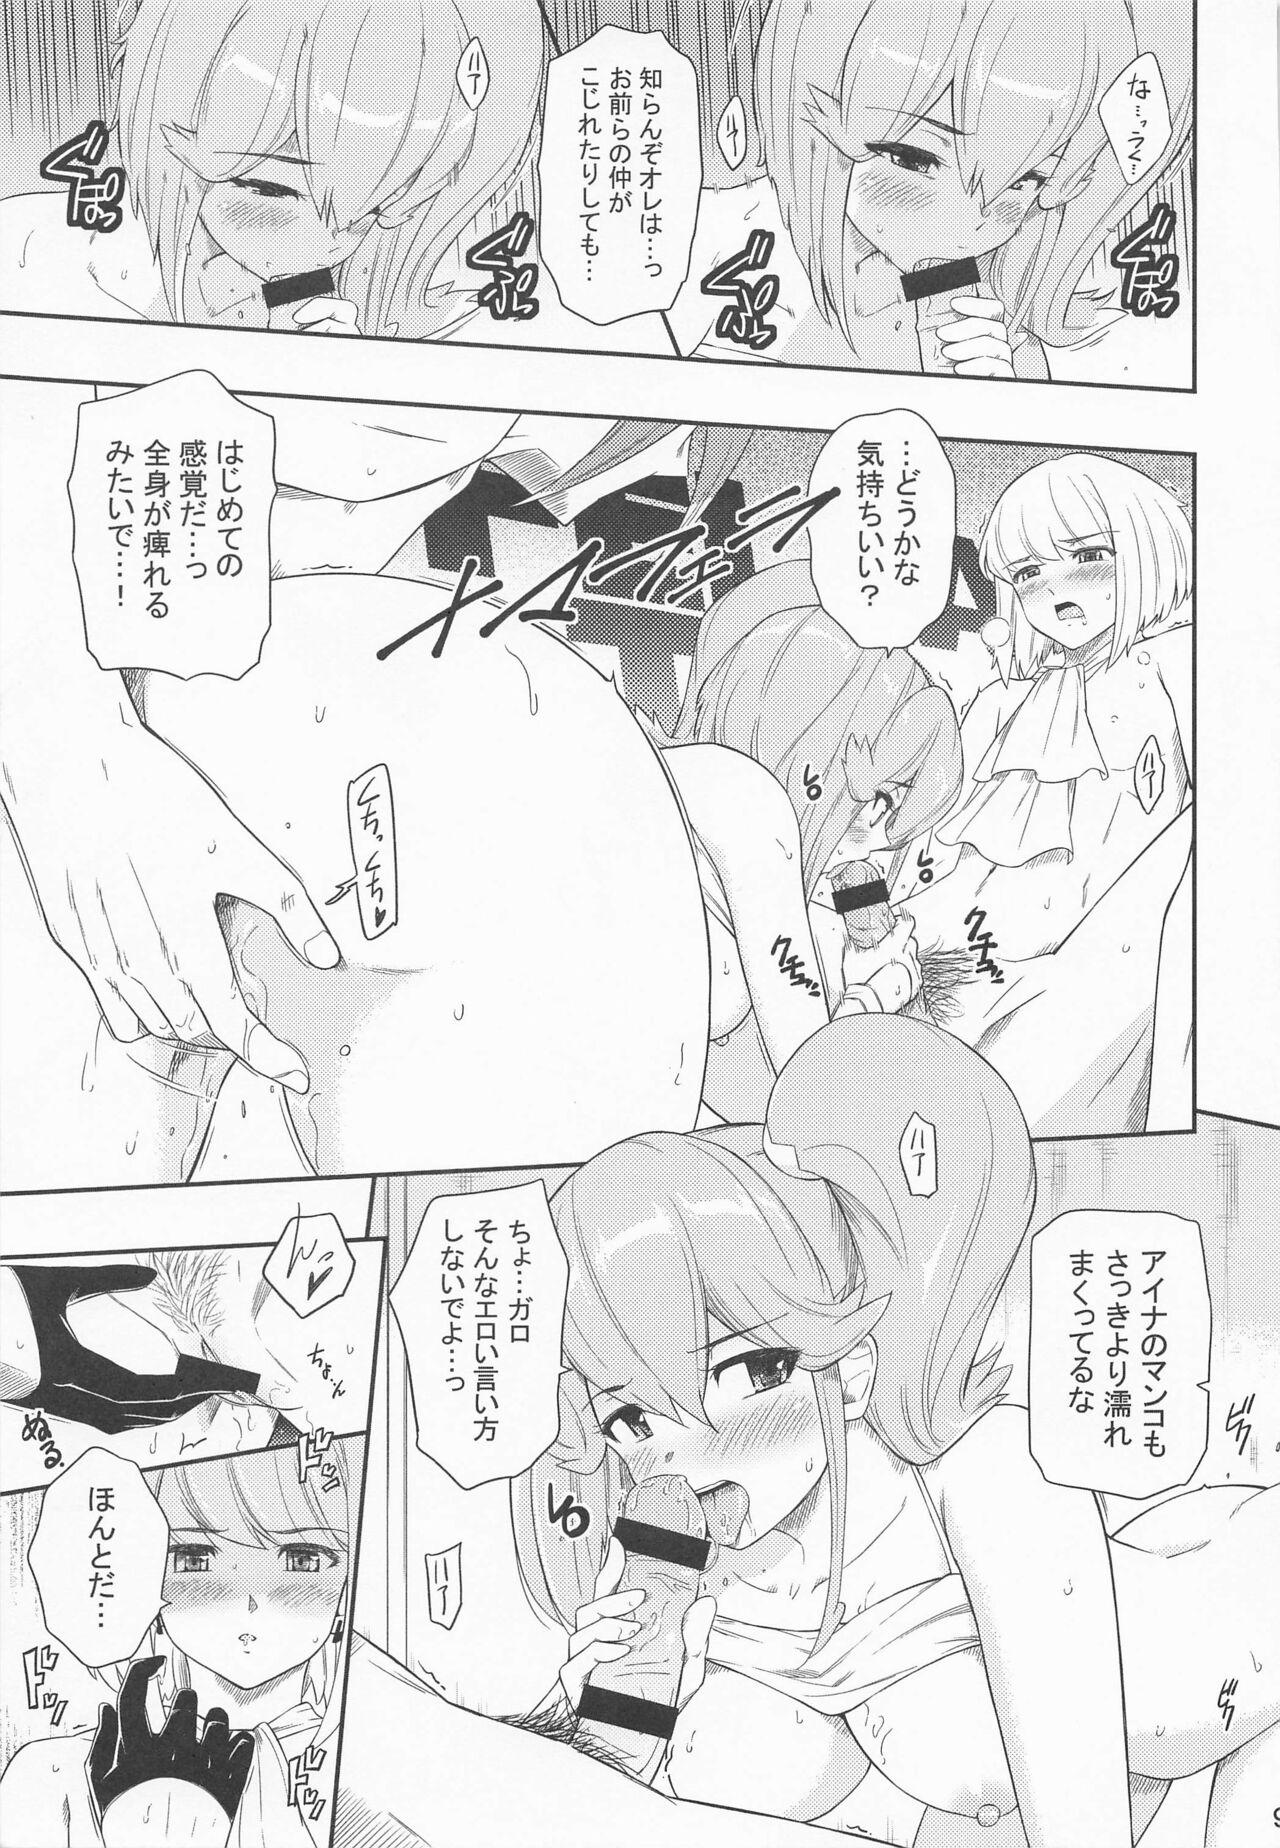 Bokep EROMARE - Suddenly 3P sex is happening... - Promare Foda - Page 8